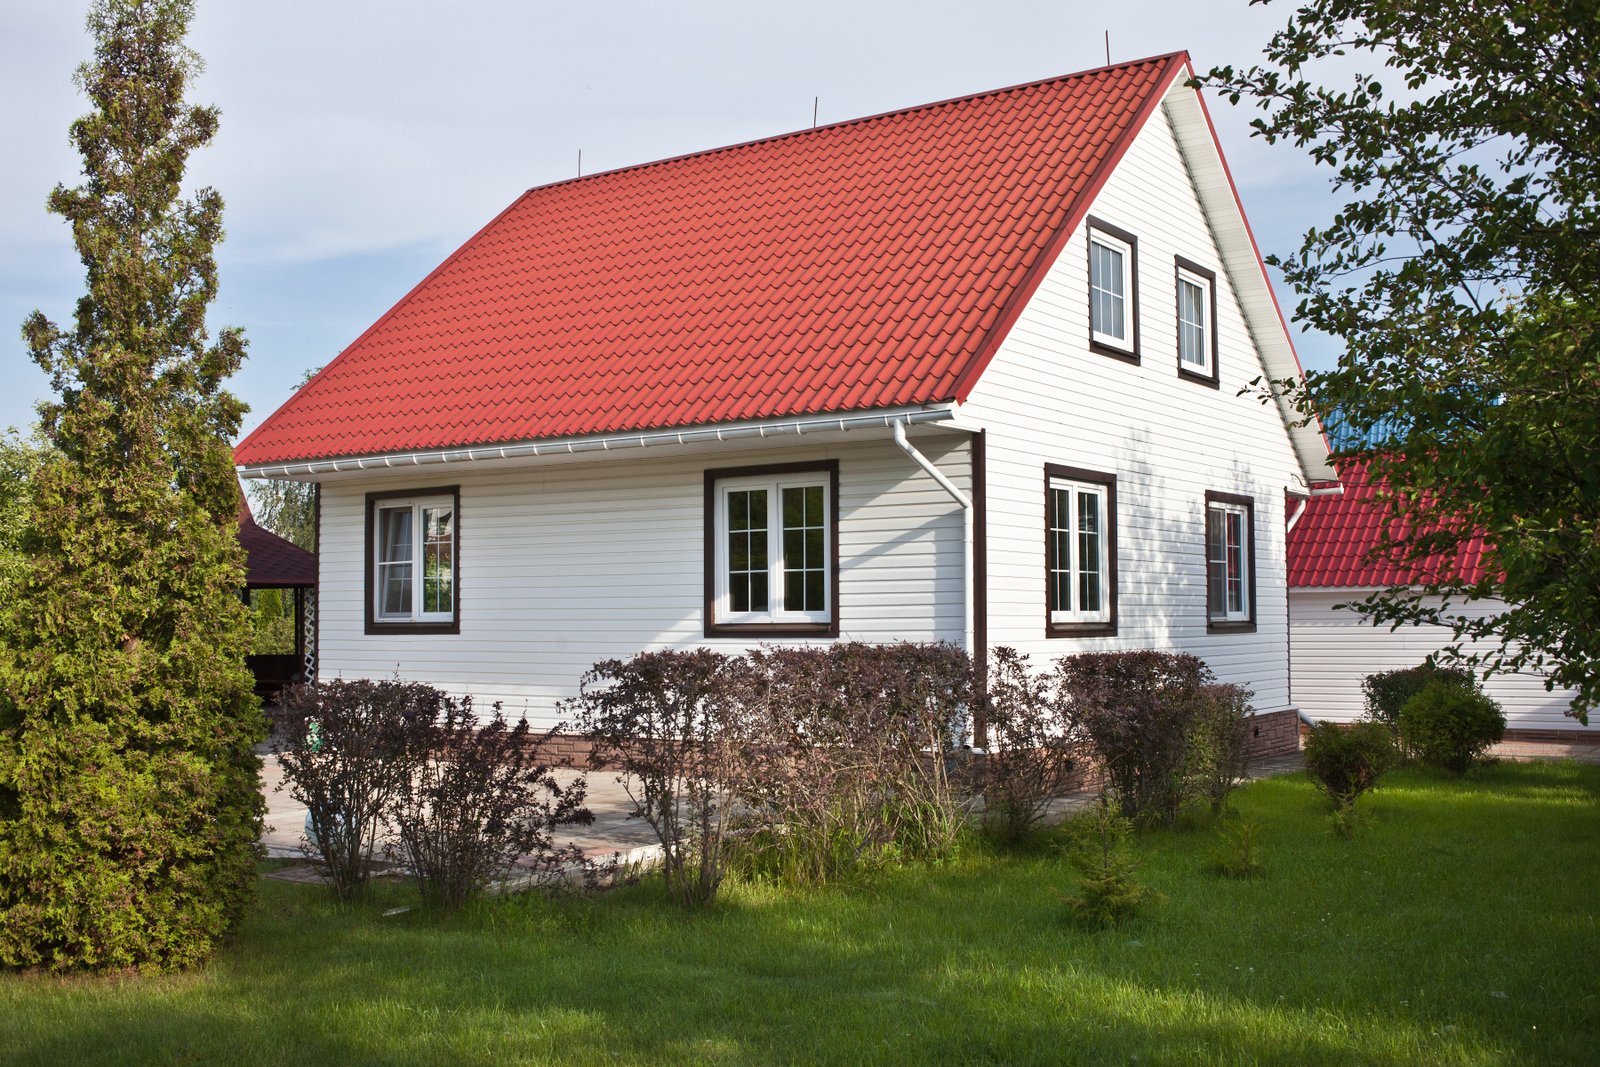 13 Colors to Paint a House With Red Roof (With Images)